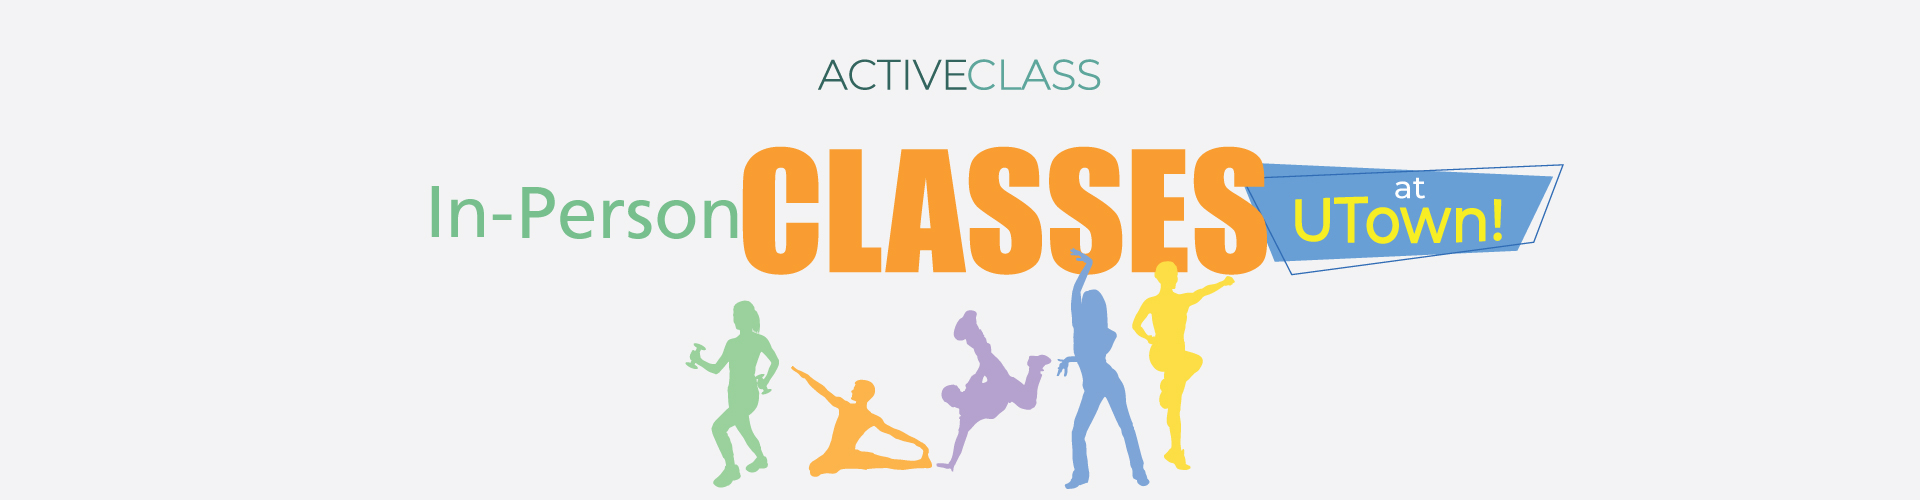 ActiveClassesUTown23_Homepage_1920x500